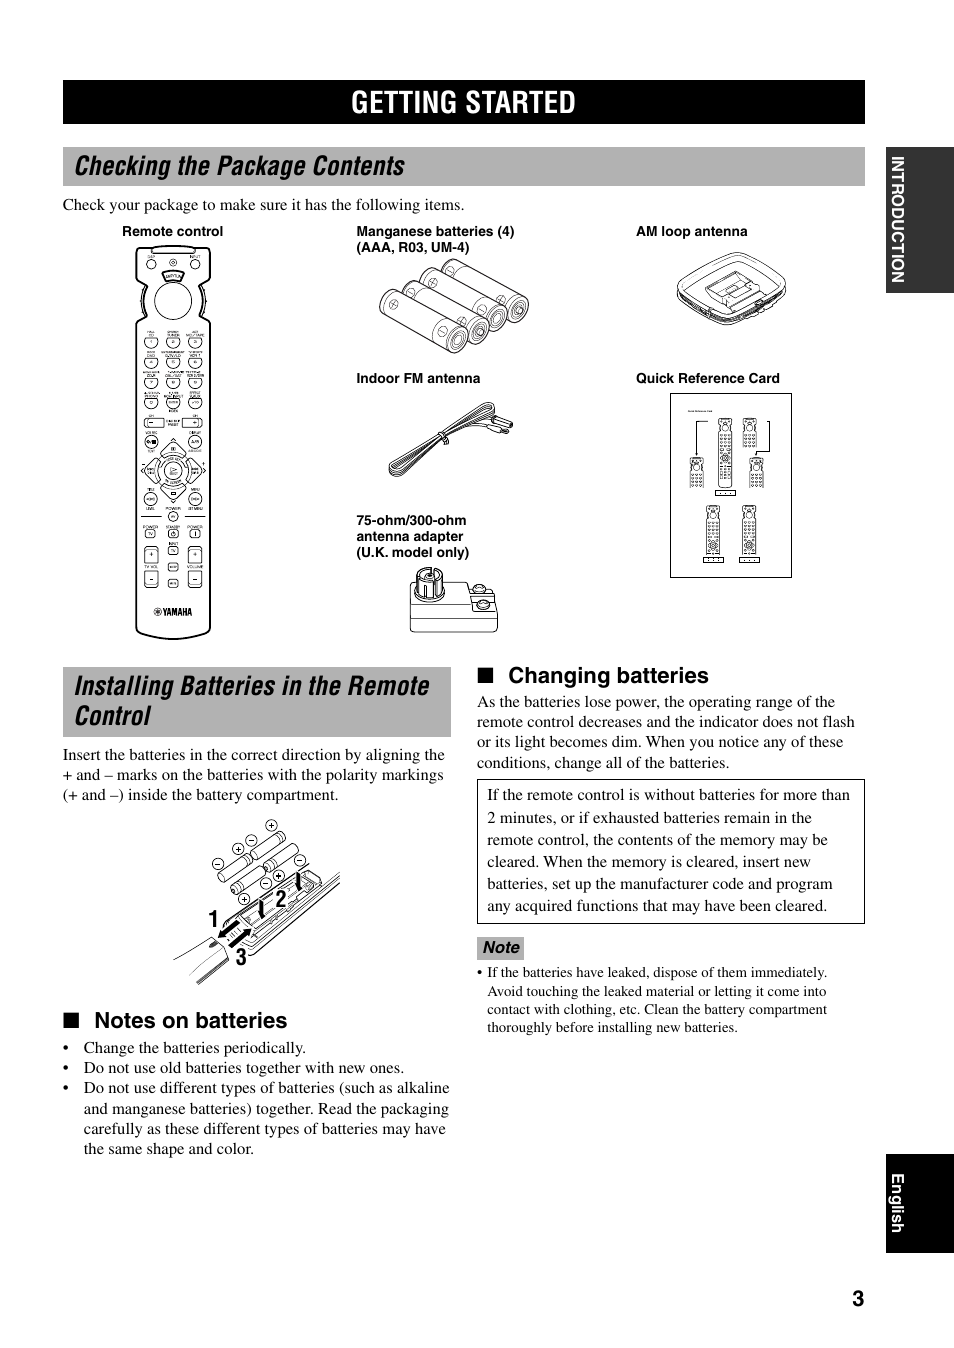 Getting started, Installing batteries in the remote control, Checking the package contents | Changing batteries | Yamaha RX-V800RDS User Manual | Page 5 / 83